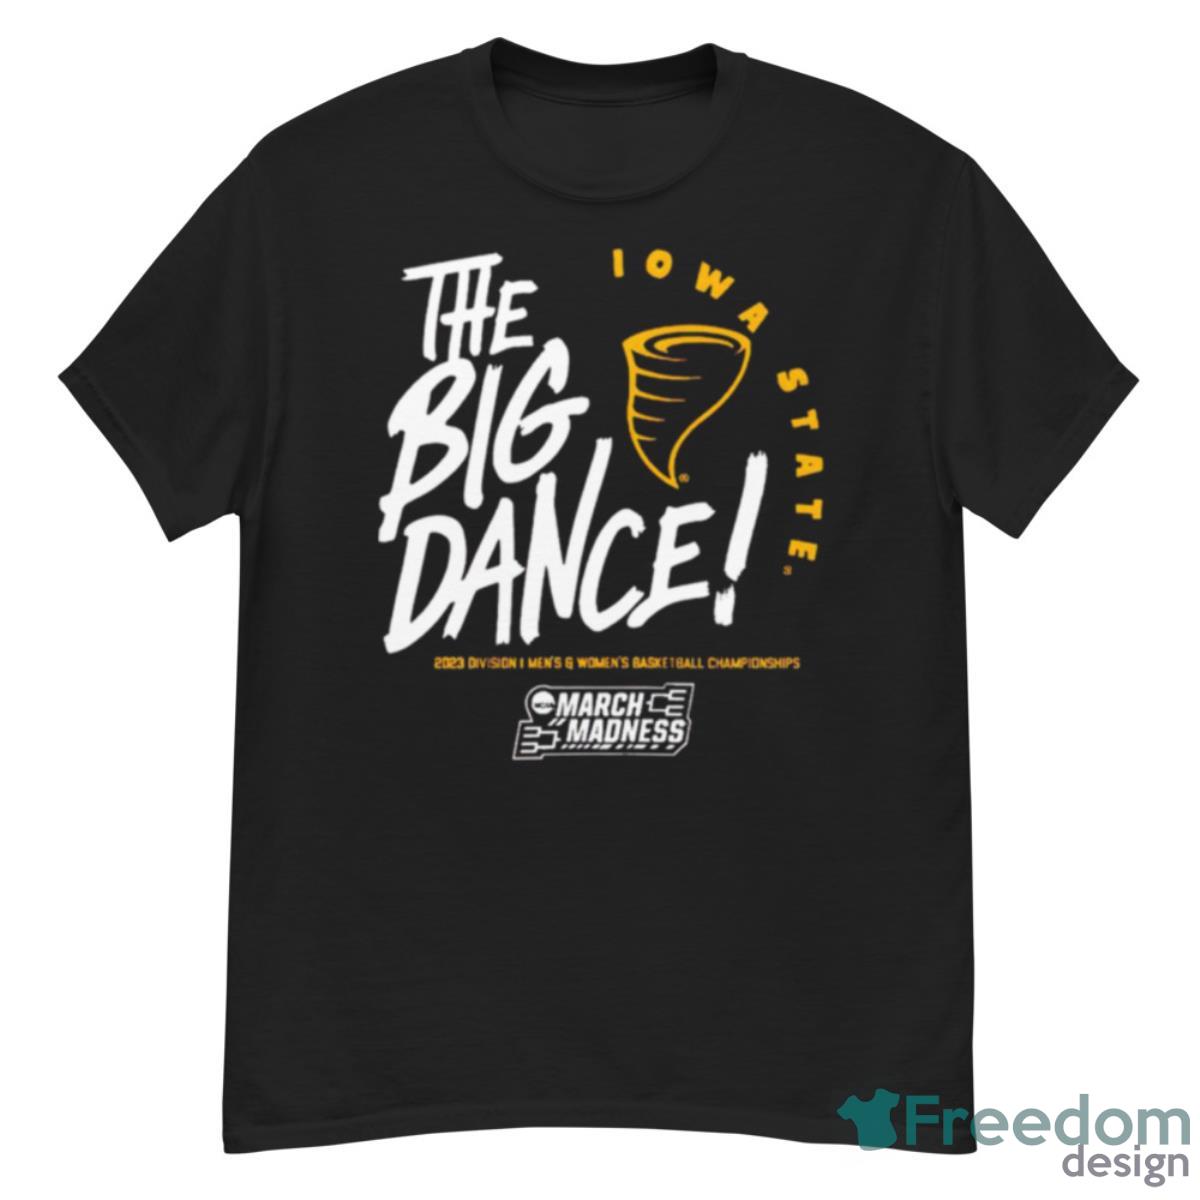 Iowa State Cyclones The Big Dance March Madness 2023 Division Men’s And Women’s Basketball Championship Shirt - G500 Men’s Classic T-Shirt